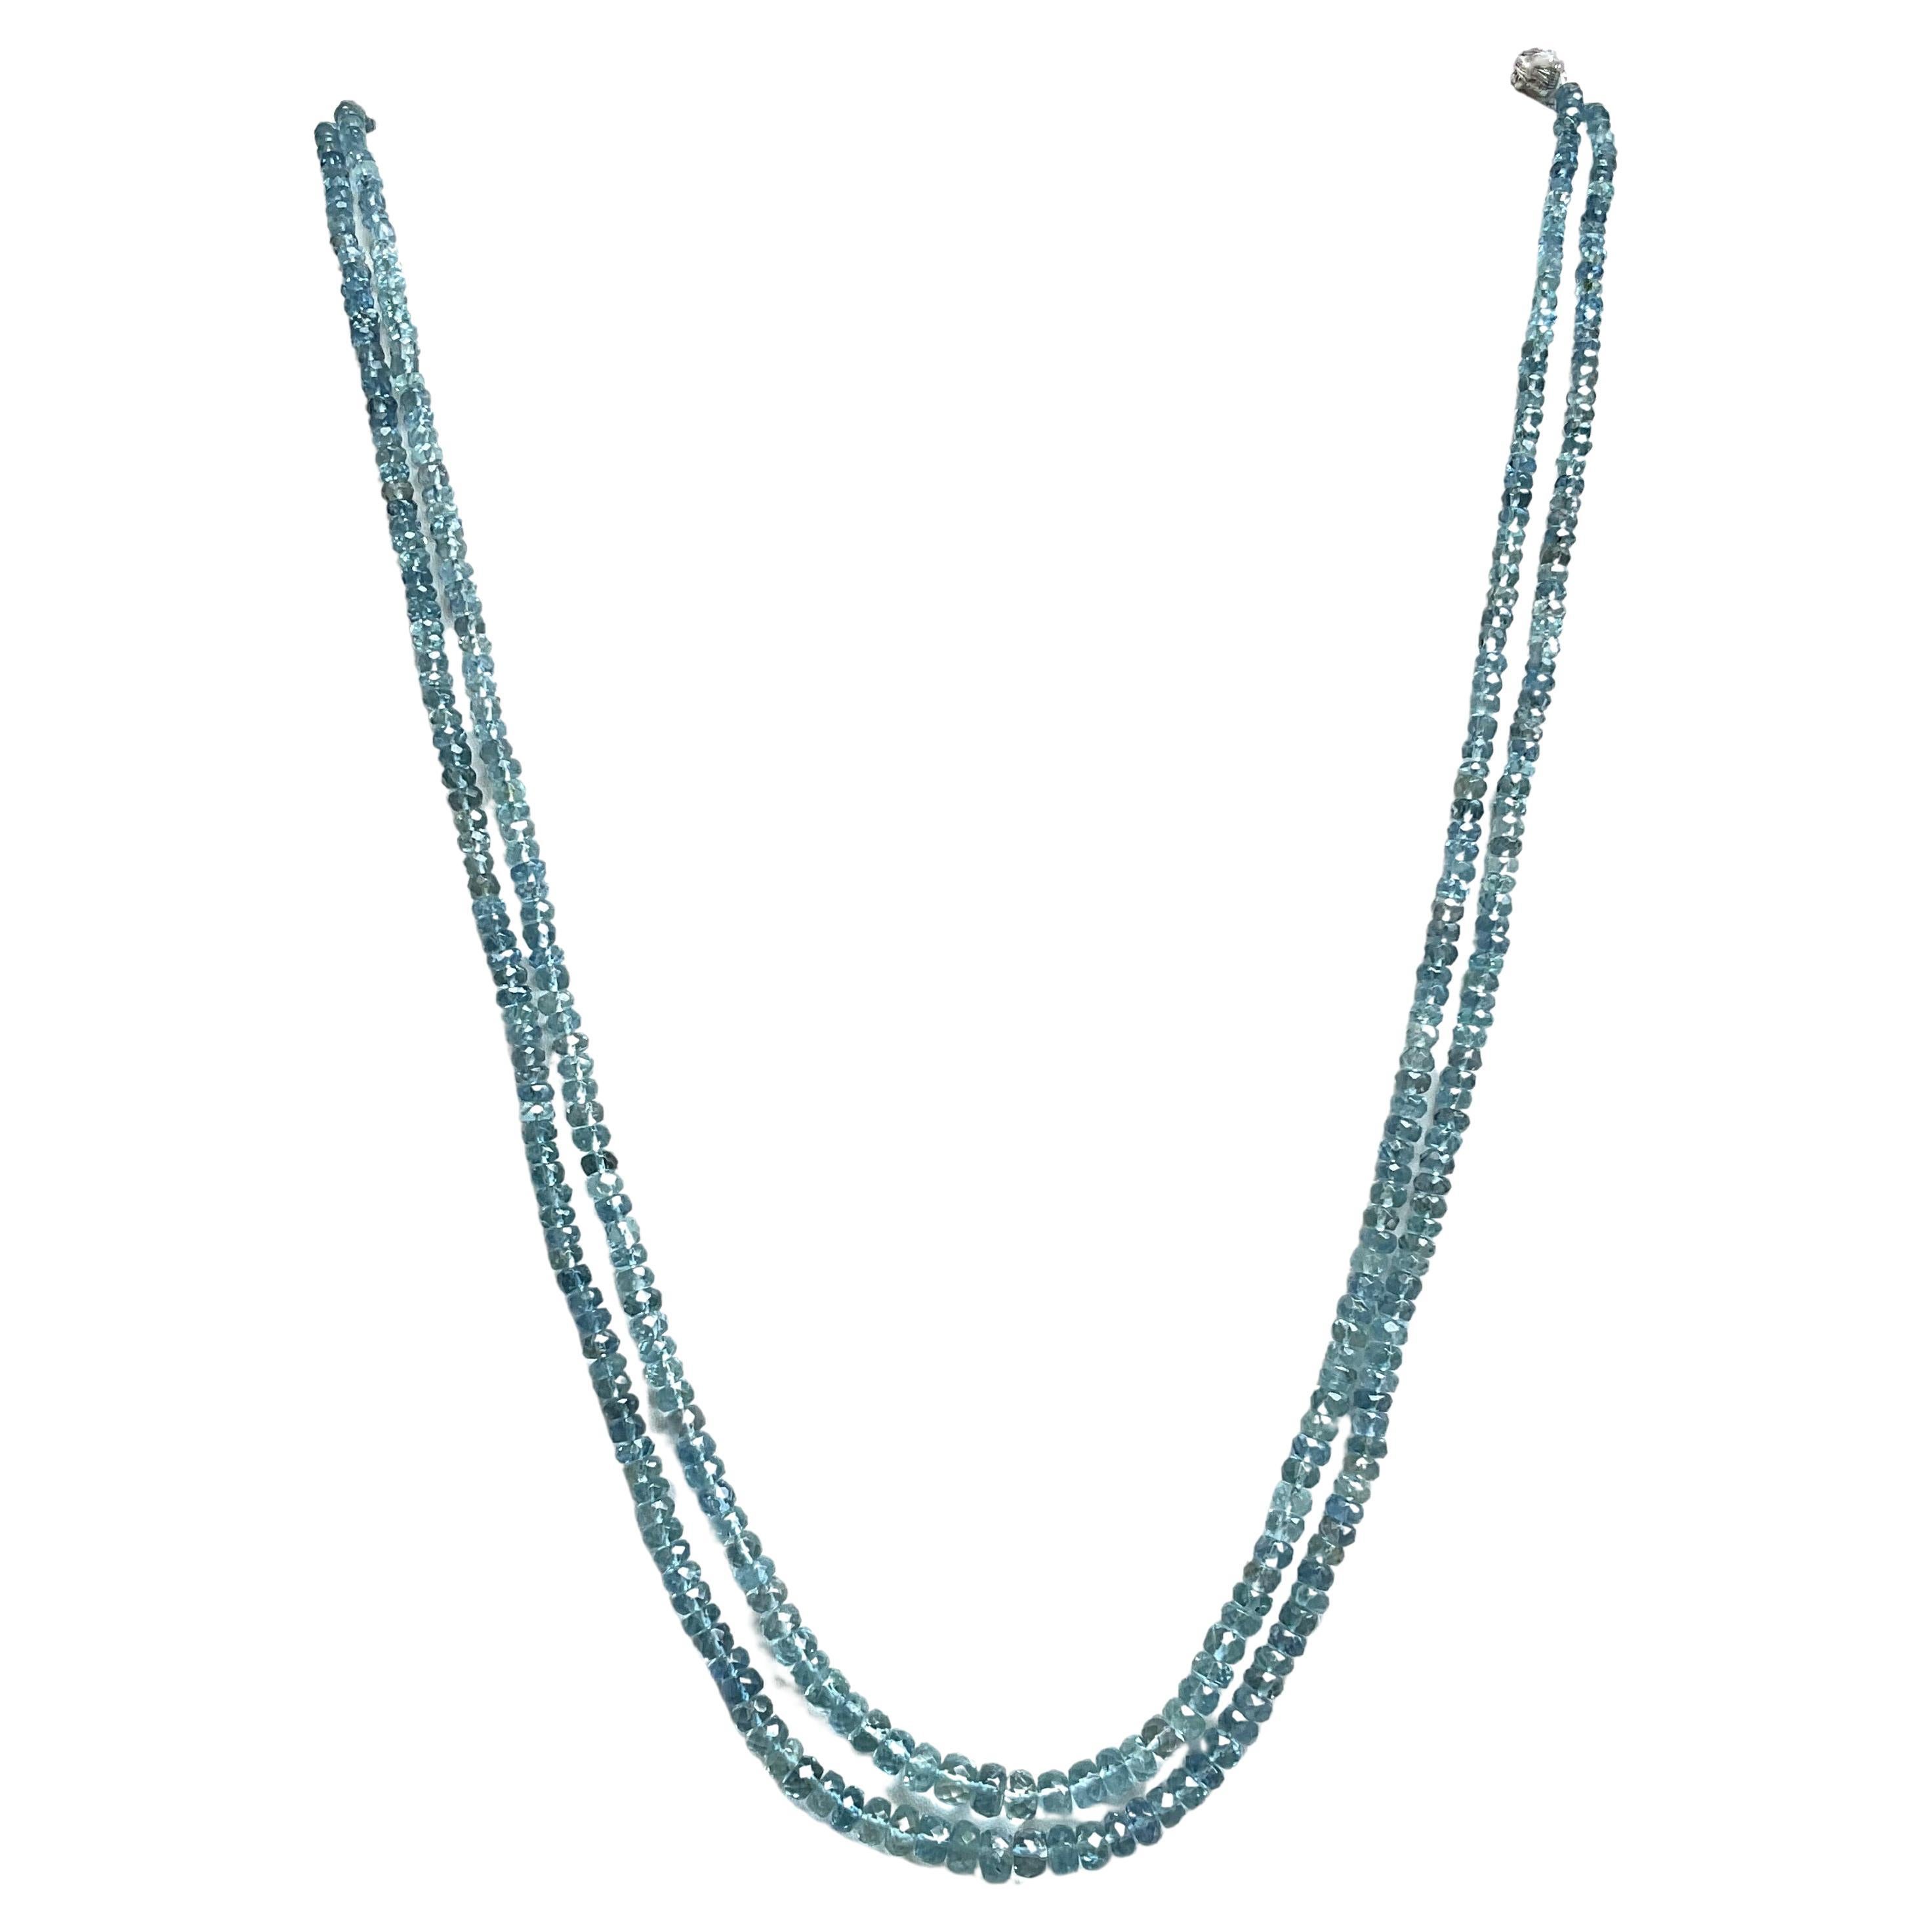 117.90 carats Aquamarine Beaded Necklace 2 Strand Faceted Beads good Quality Gem

gemstone - Aquamarine 
weight - 117.90 carats
size - 3 To 6 mm
quantity - 2 Strand
Length : 18 Inch.